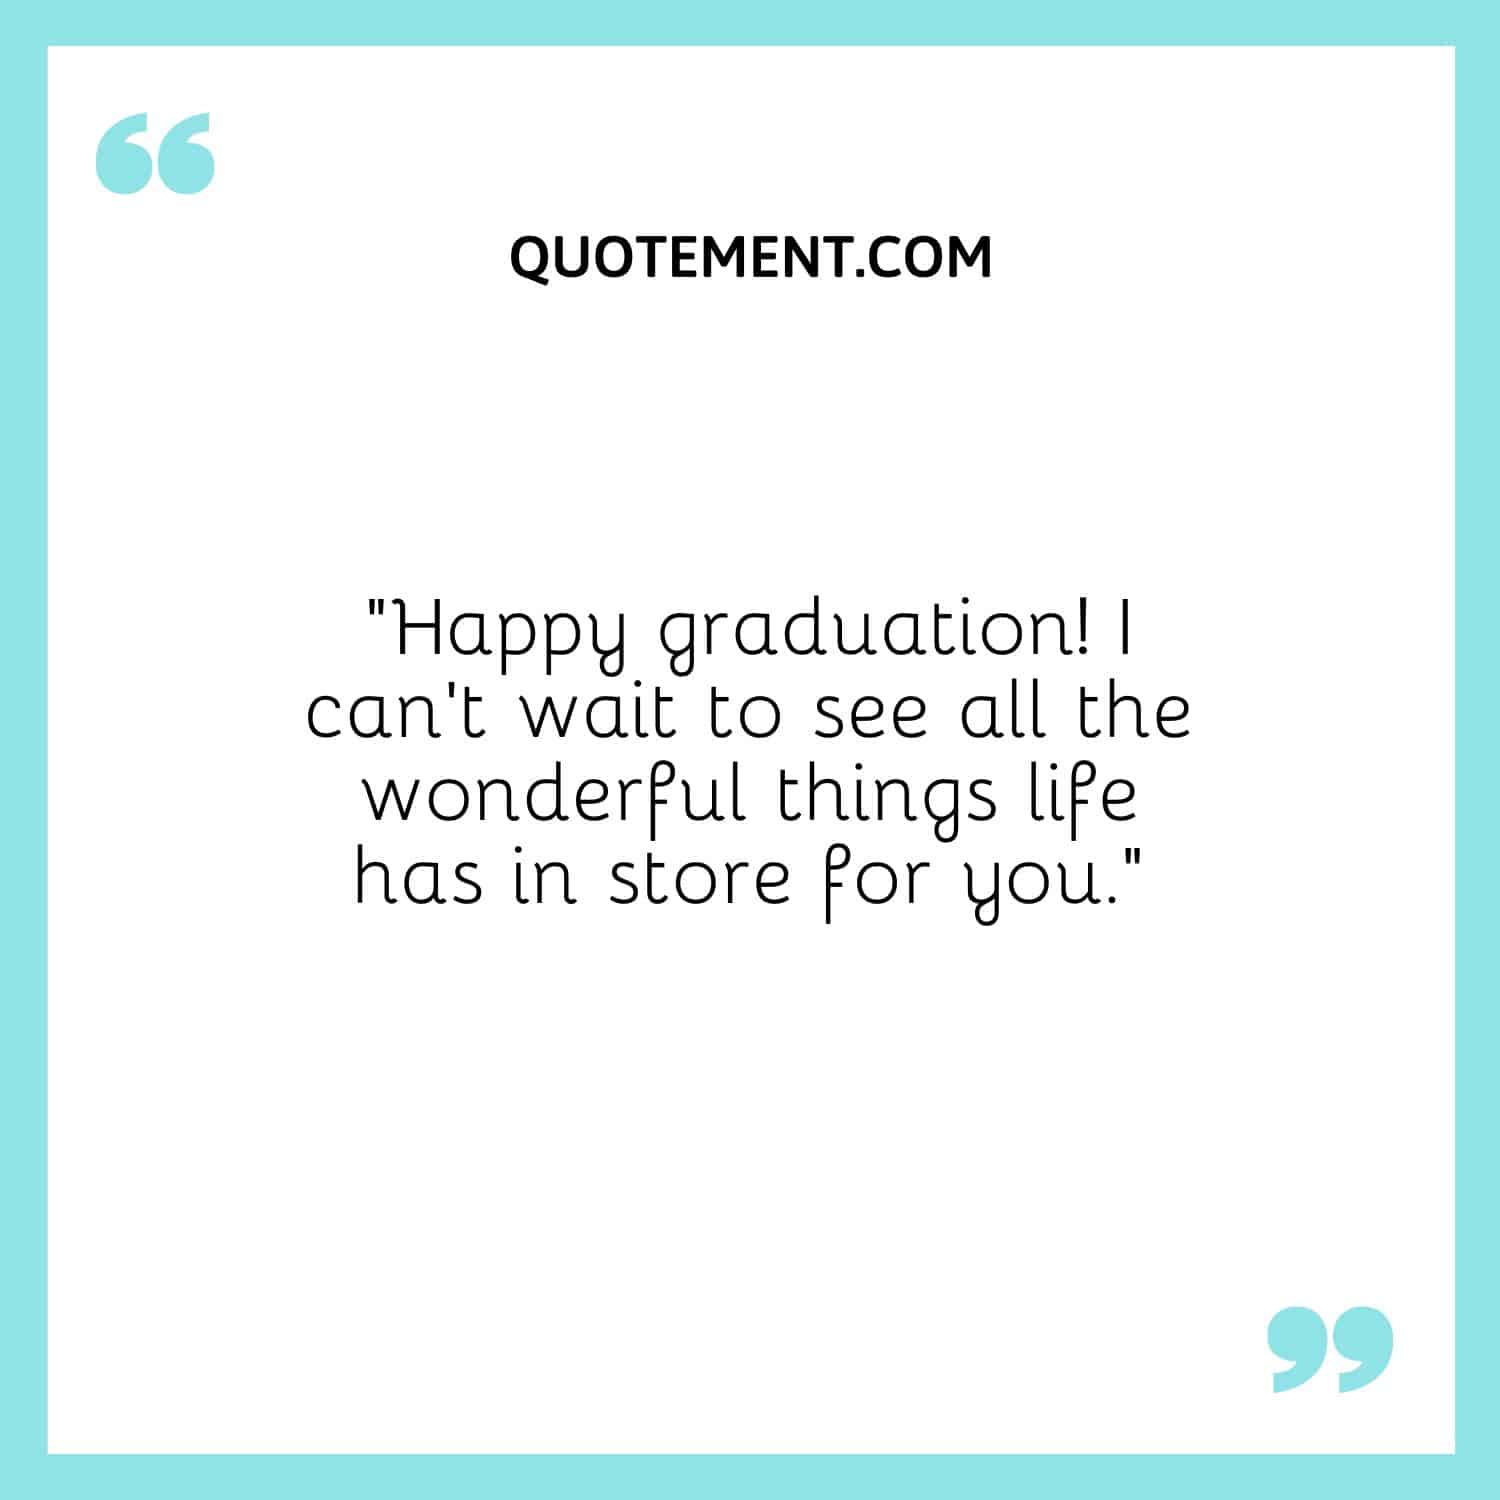 “Happy graduation! I can’t wait to see all the wonderful things life has in store for you.”